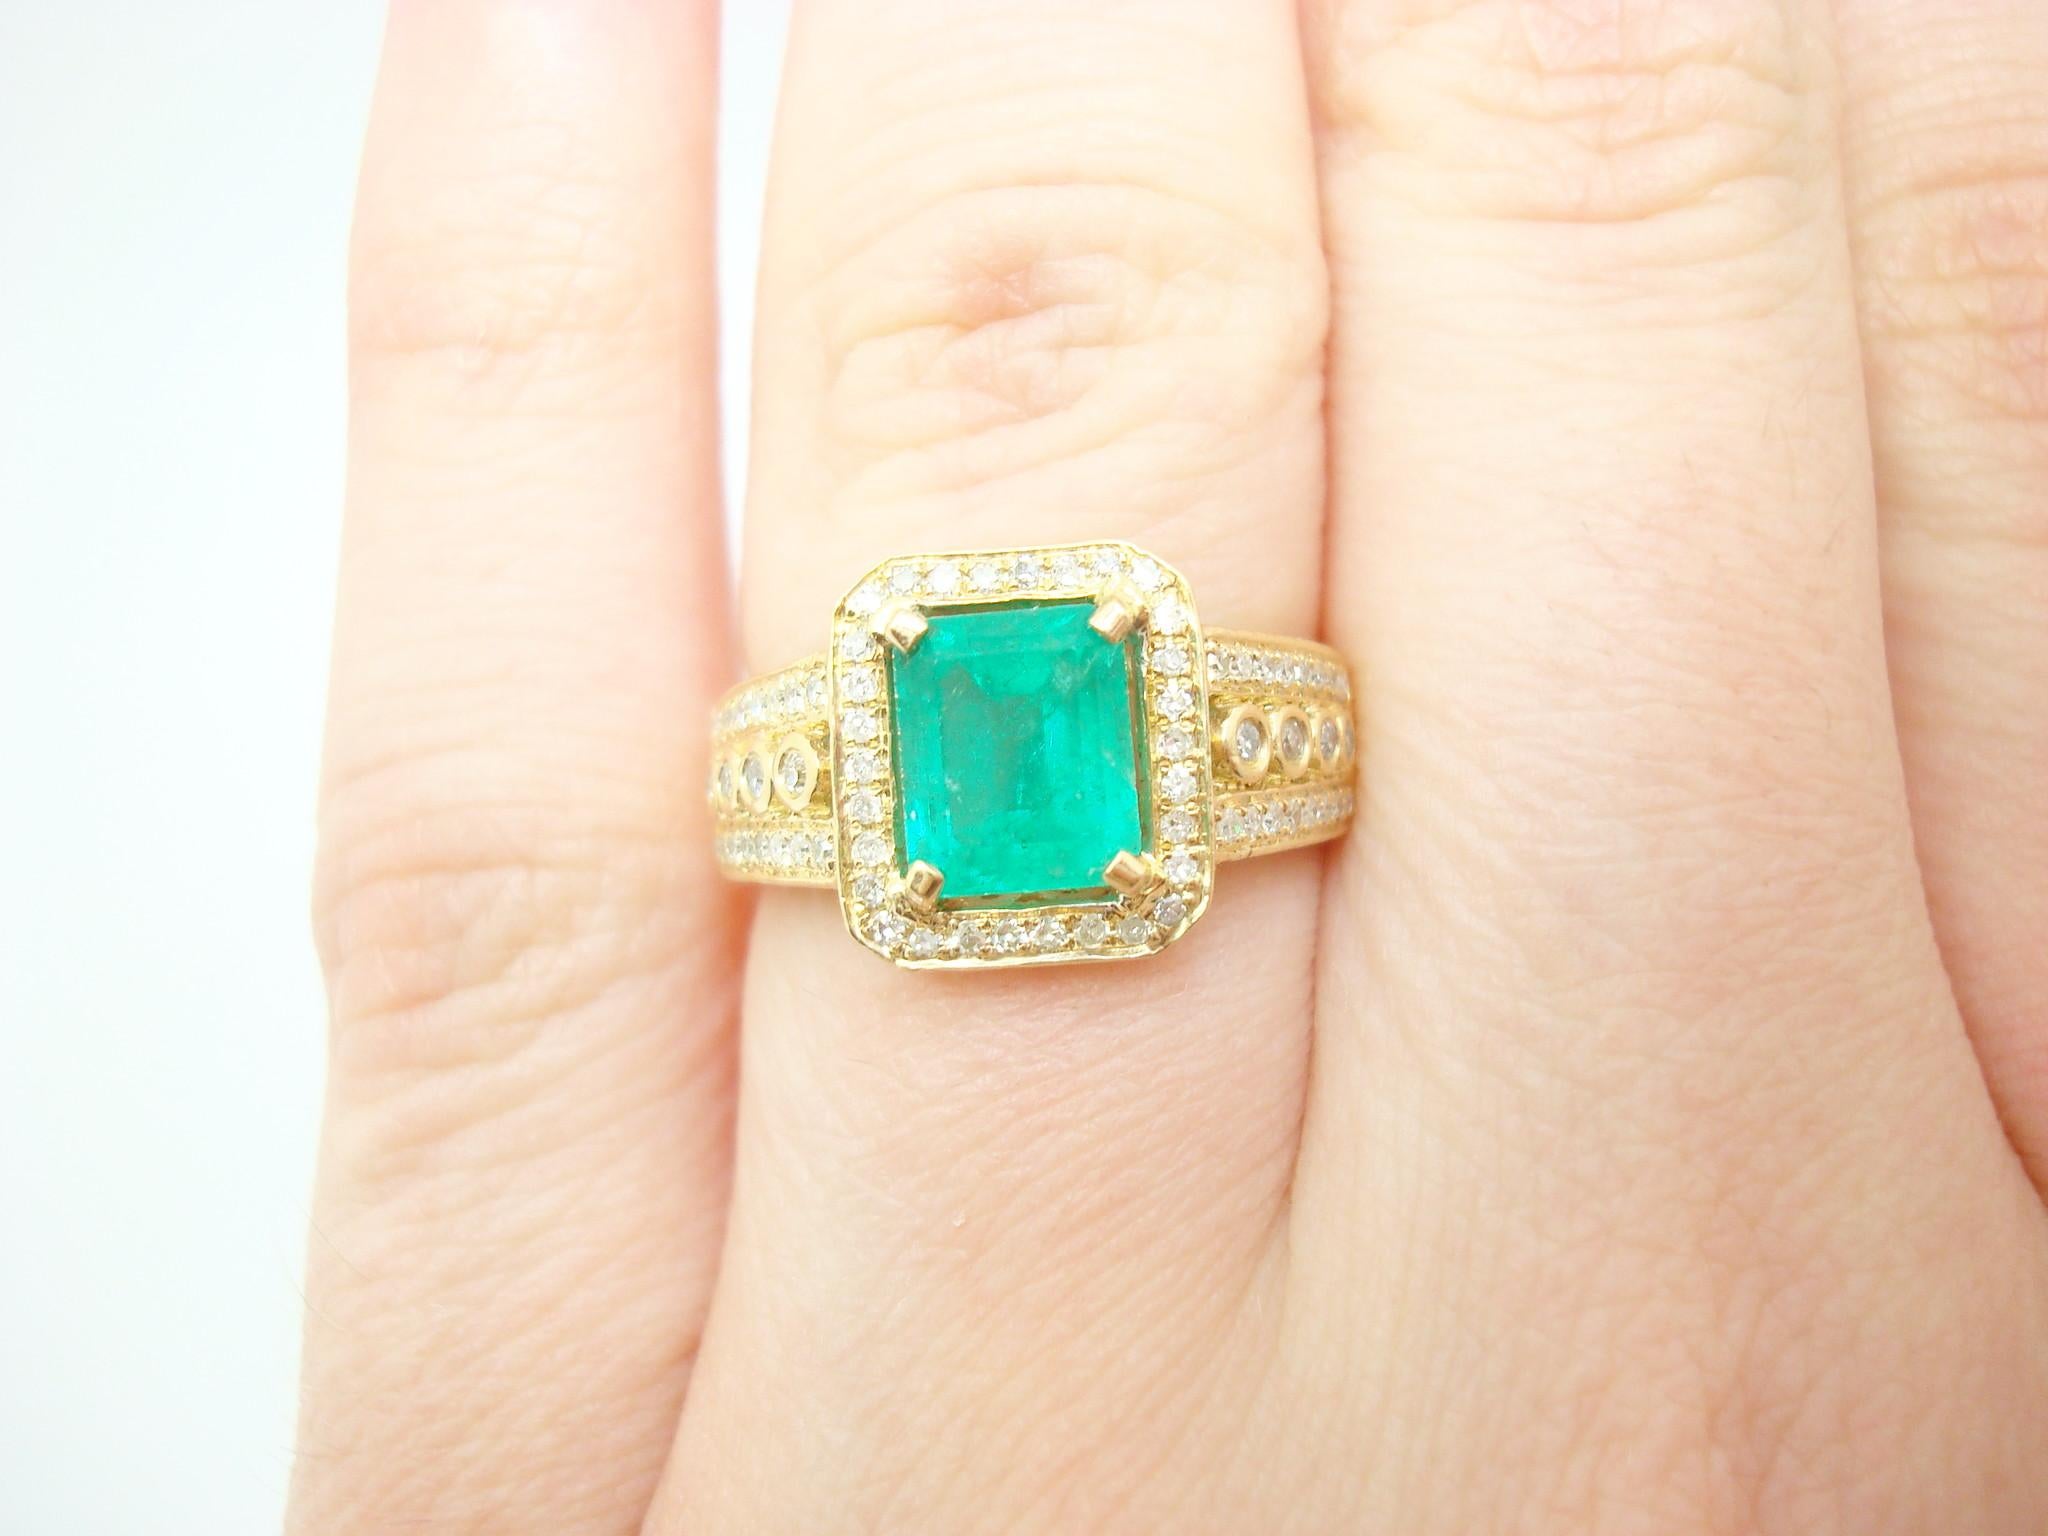 10k Gold 1.62ct Genuine Natural Emerald Ring with 1/4ct Diamonds '#J2604' In Excellent Condition For Sale In Big Bend, WI